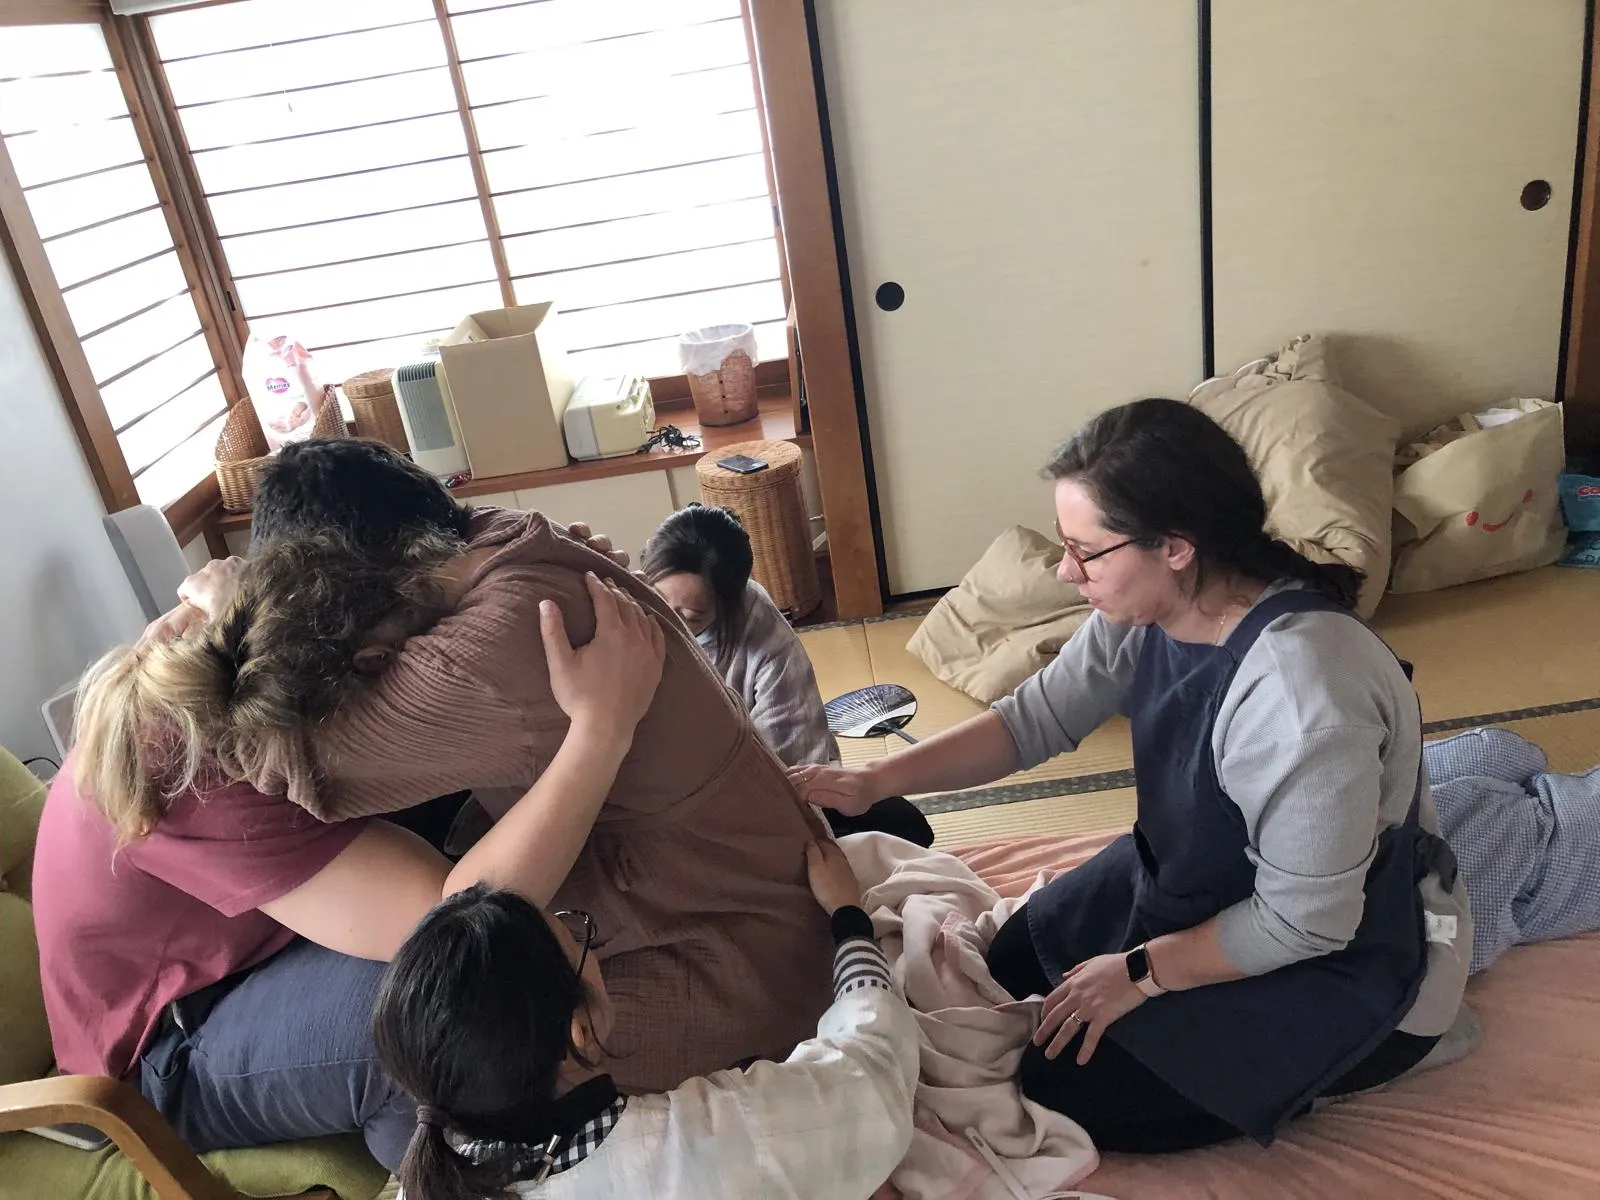 Kelly assists during a birth in Japan